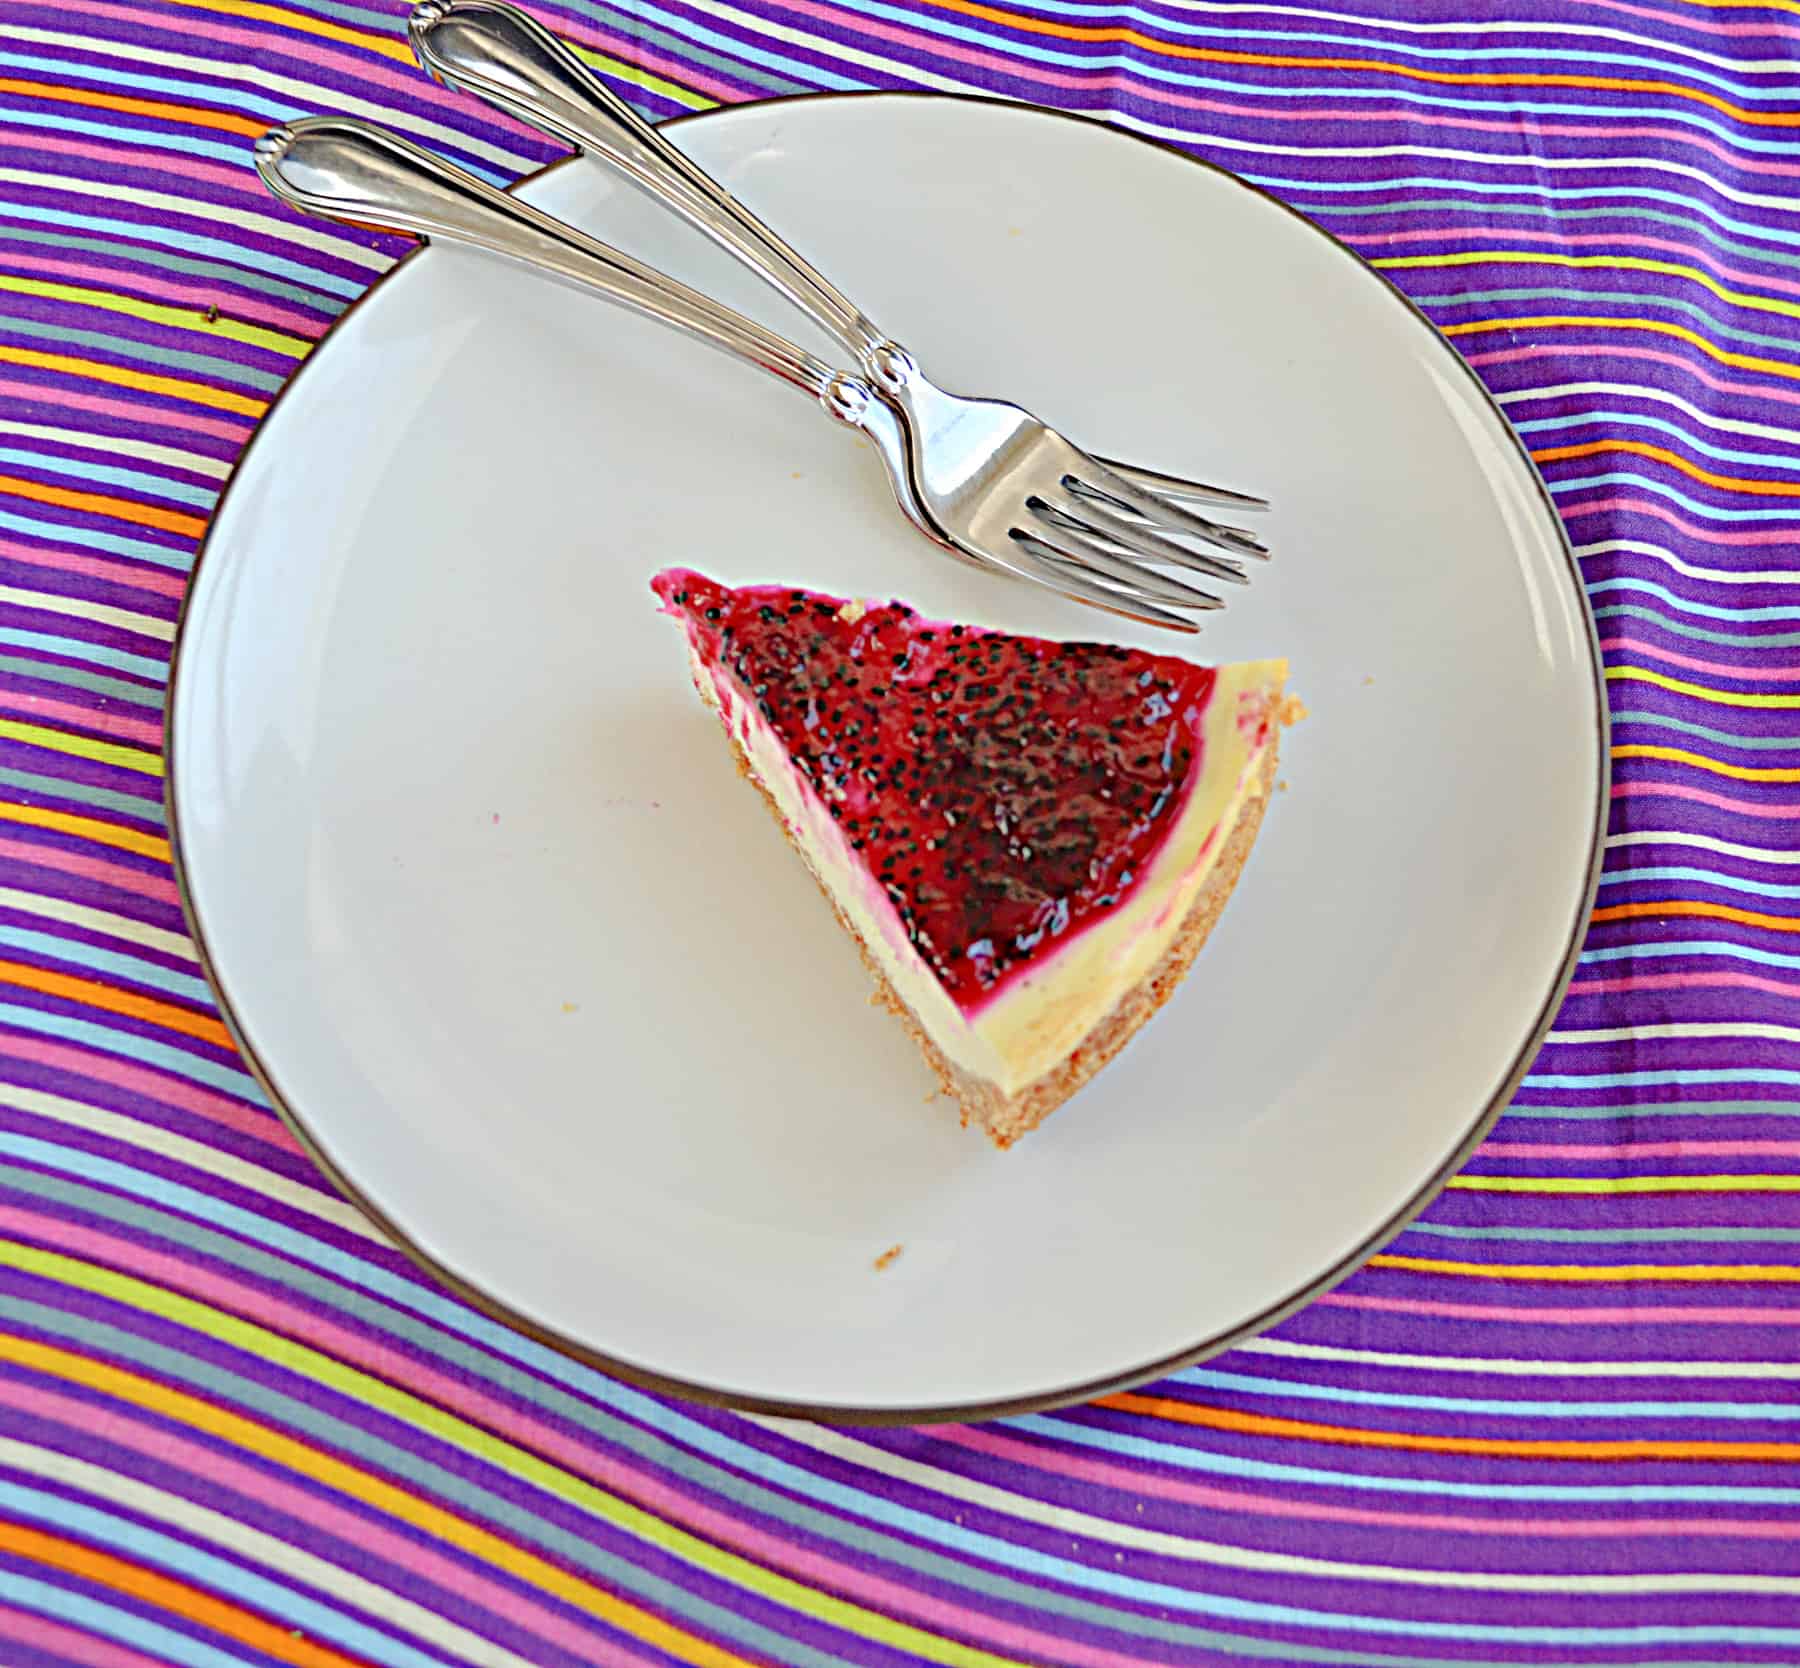 A slice of cheesecake with dragon fruit jam on a plate with 2 forks.